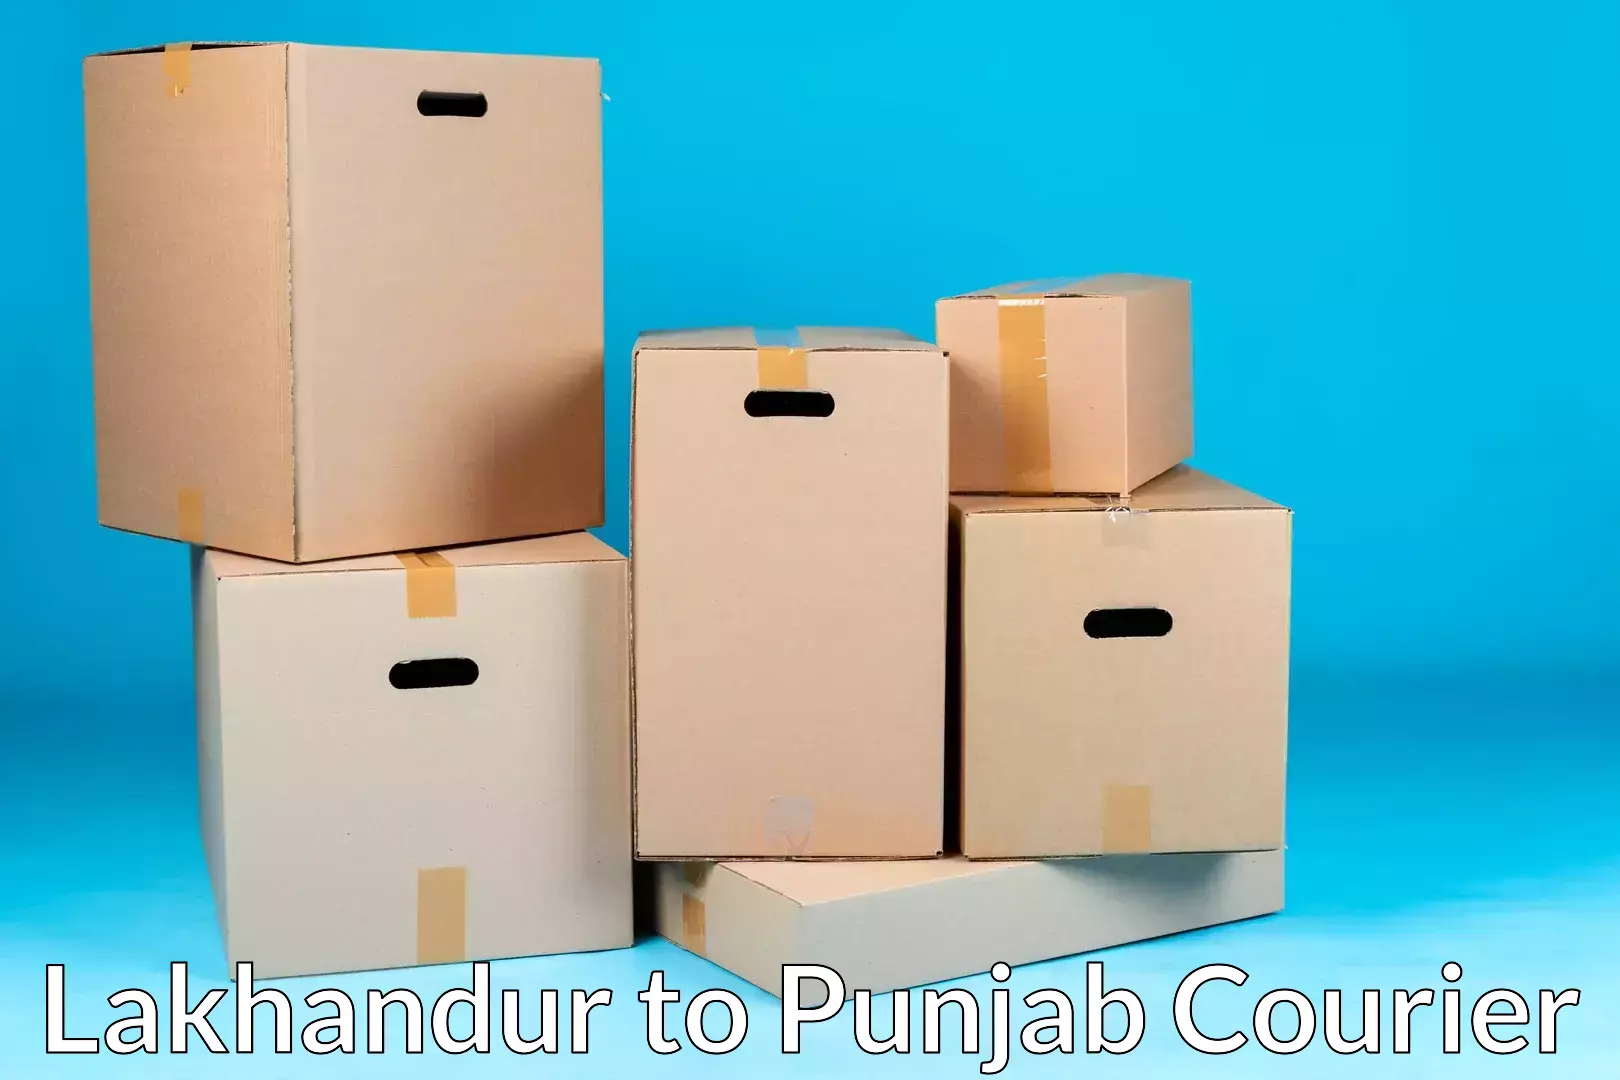 Furniture moving specialists Lakhandur to Mohali